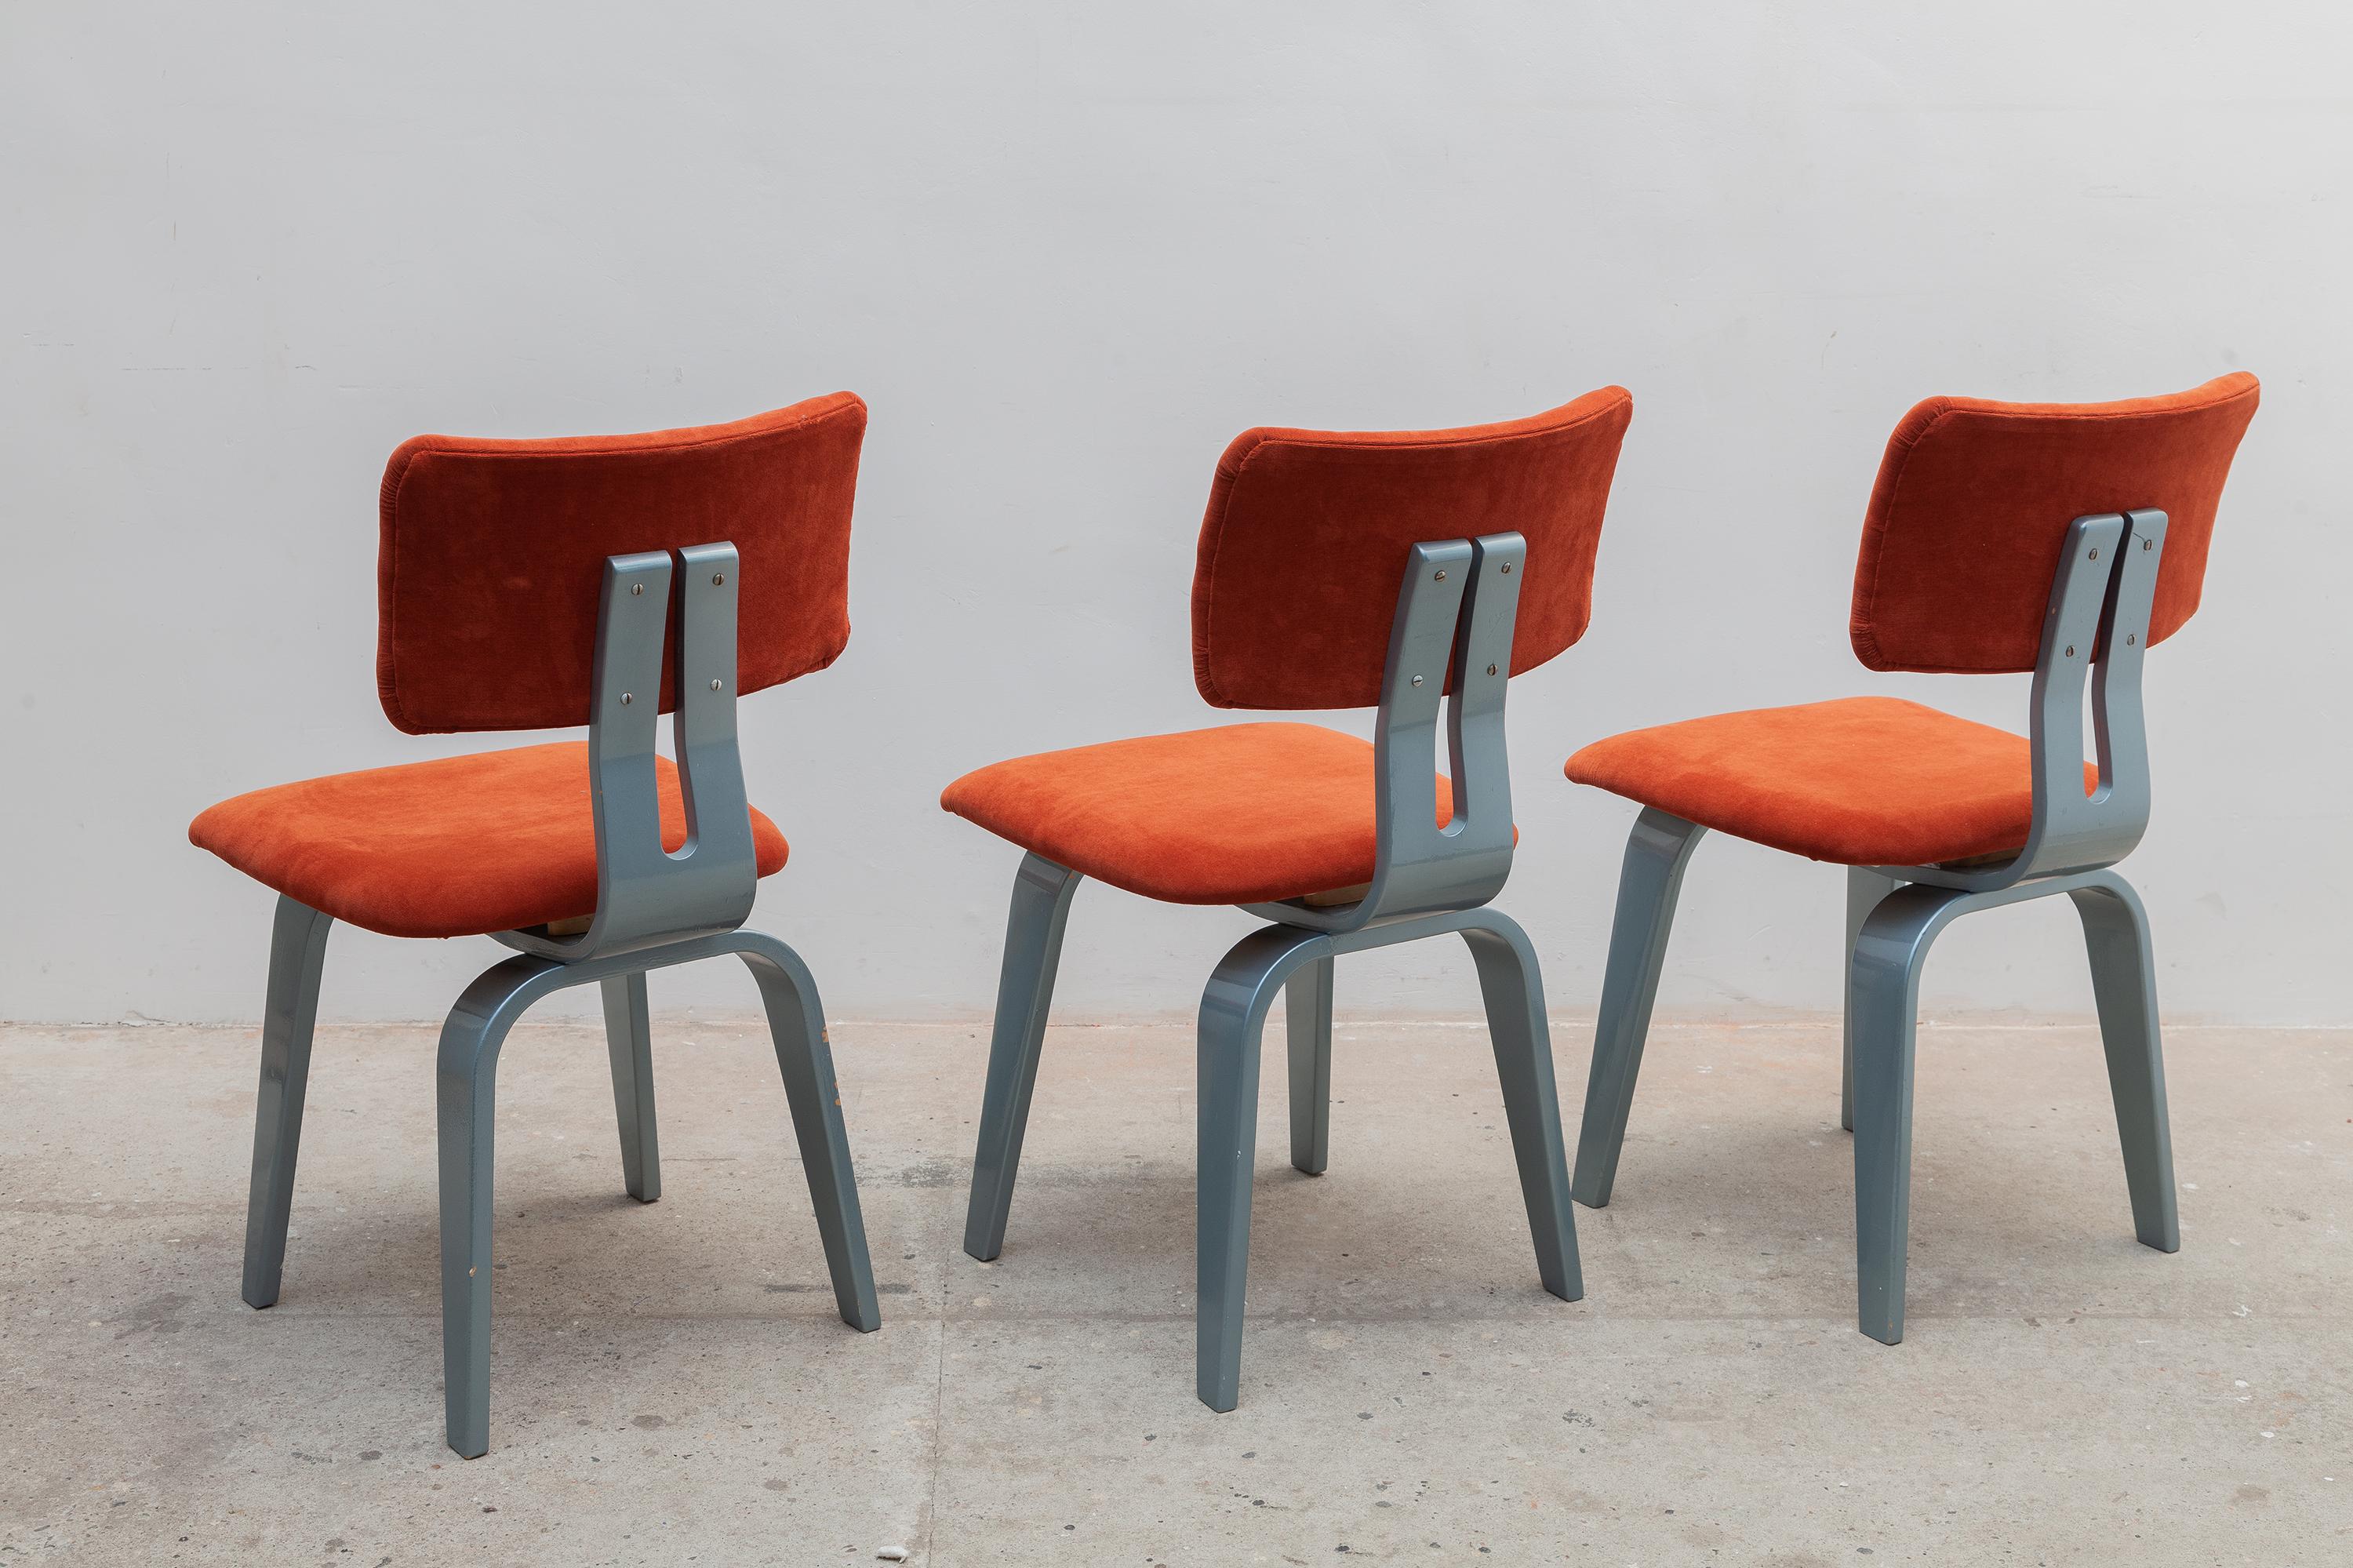 Vintage 1970s Italian chairs. Gunmetal silver lacquer frames with sculpted legs. Bright orange velveteen upholstery. Dimensions: 42W x 80H x 50D cm Seat: 45cm high.